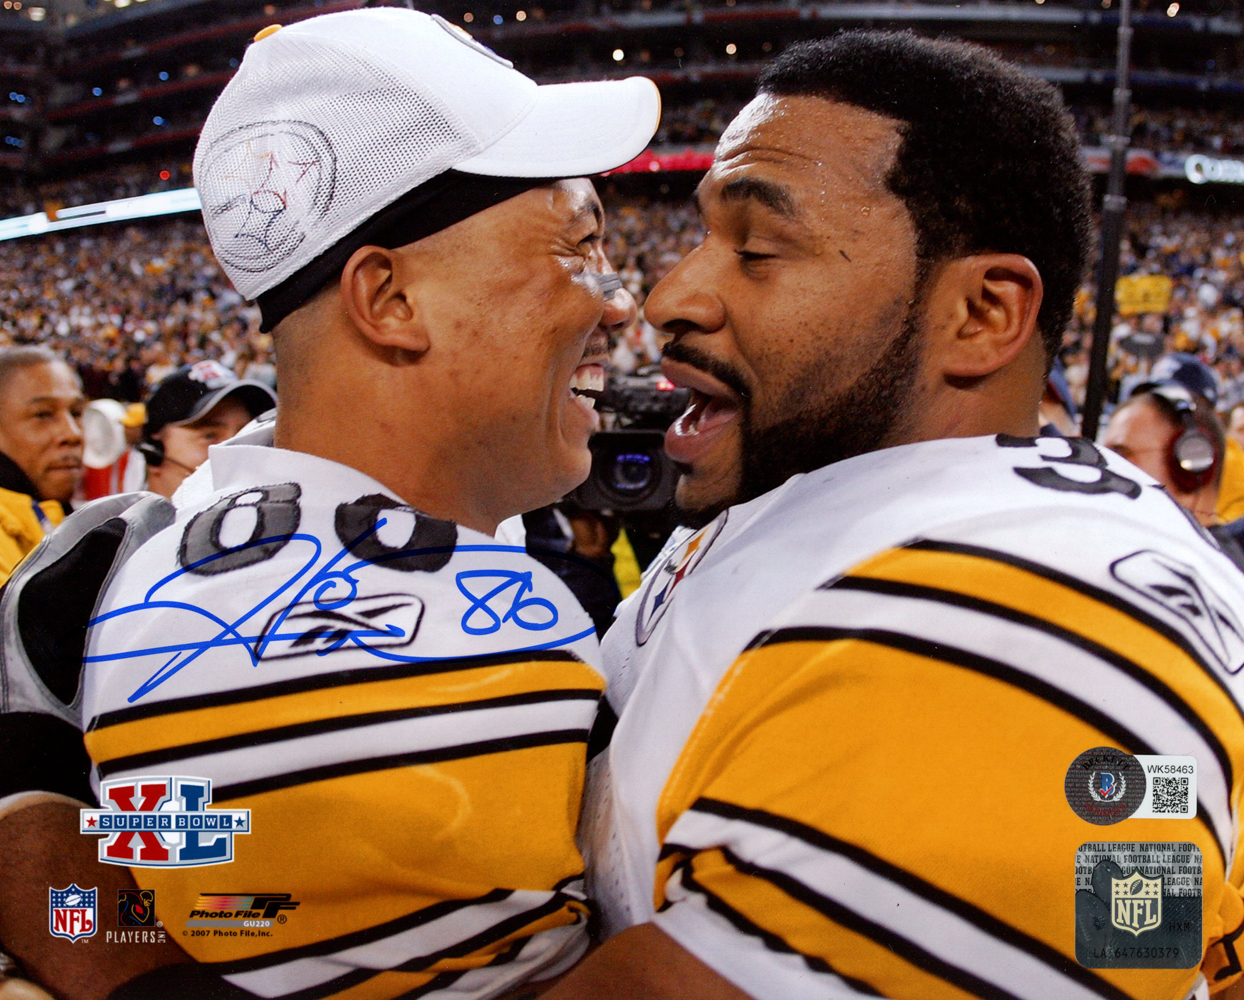 Hines Ward Autographed/Signed Pittsburgh Steelers 8x10 Photo BAS 32480